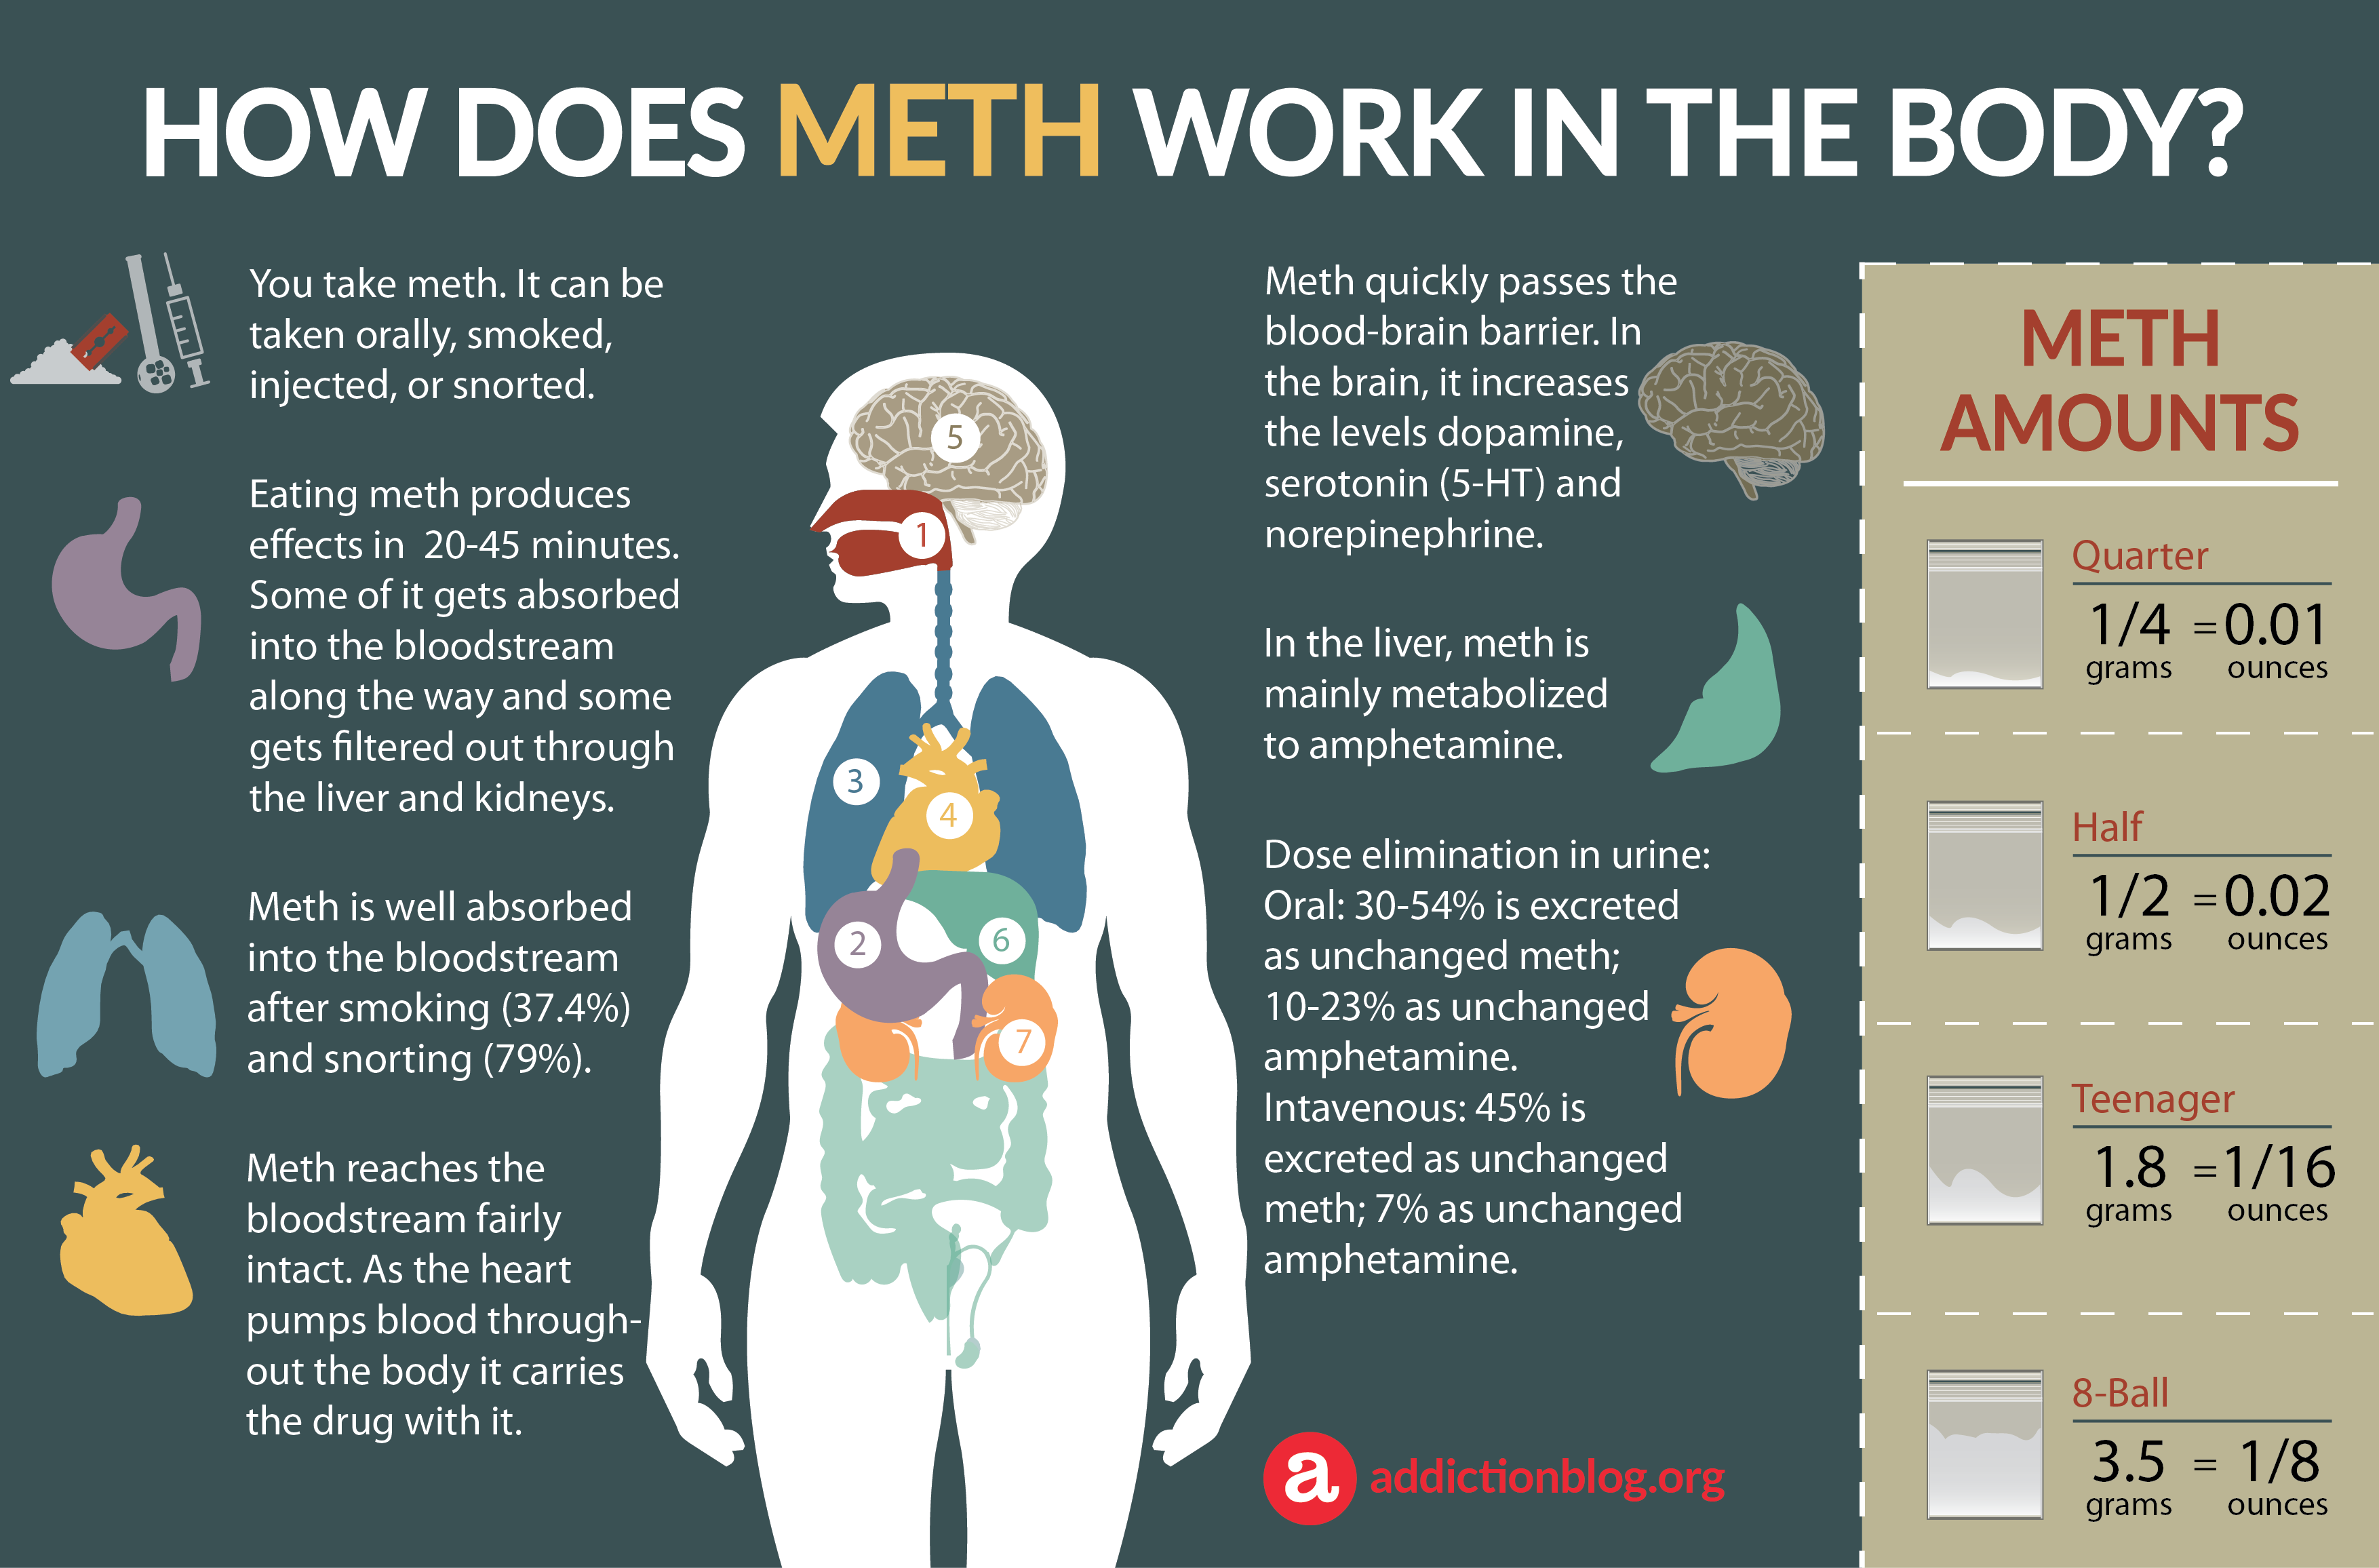 Meth Metabolism in the Body: How Meth Affects the Brain (INFOGRAPHIC)